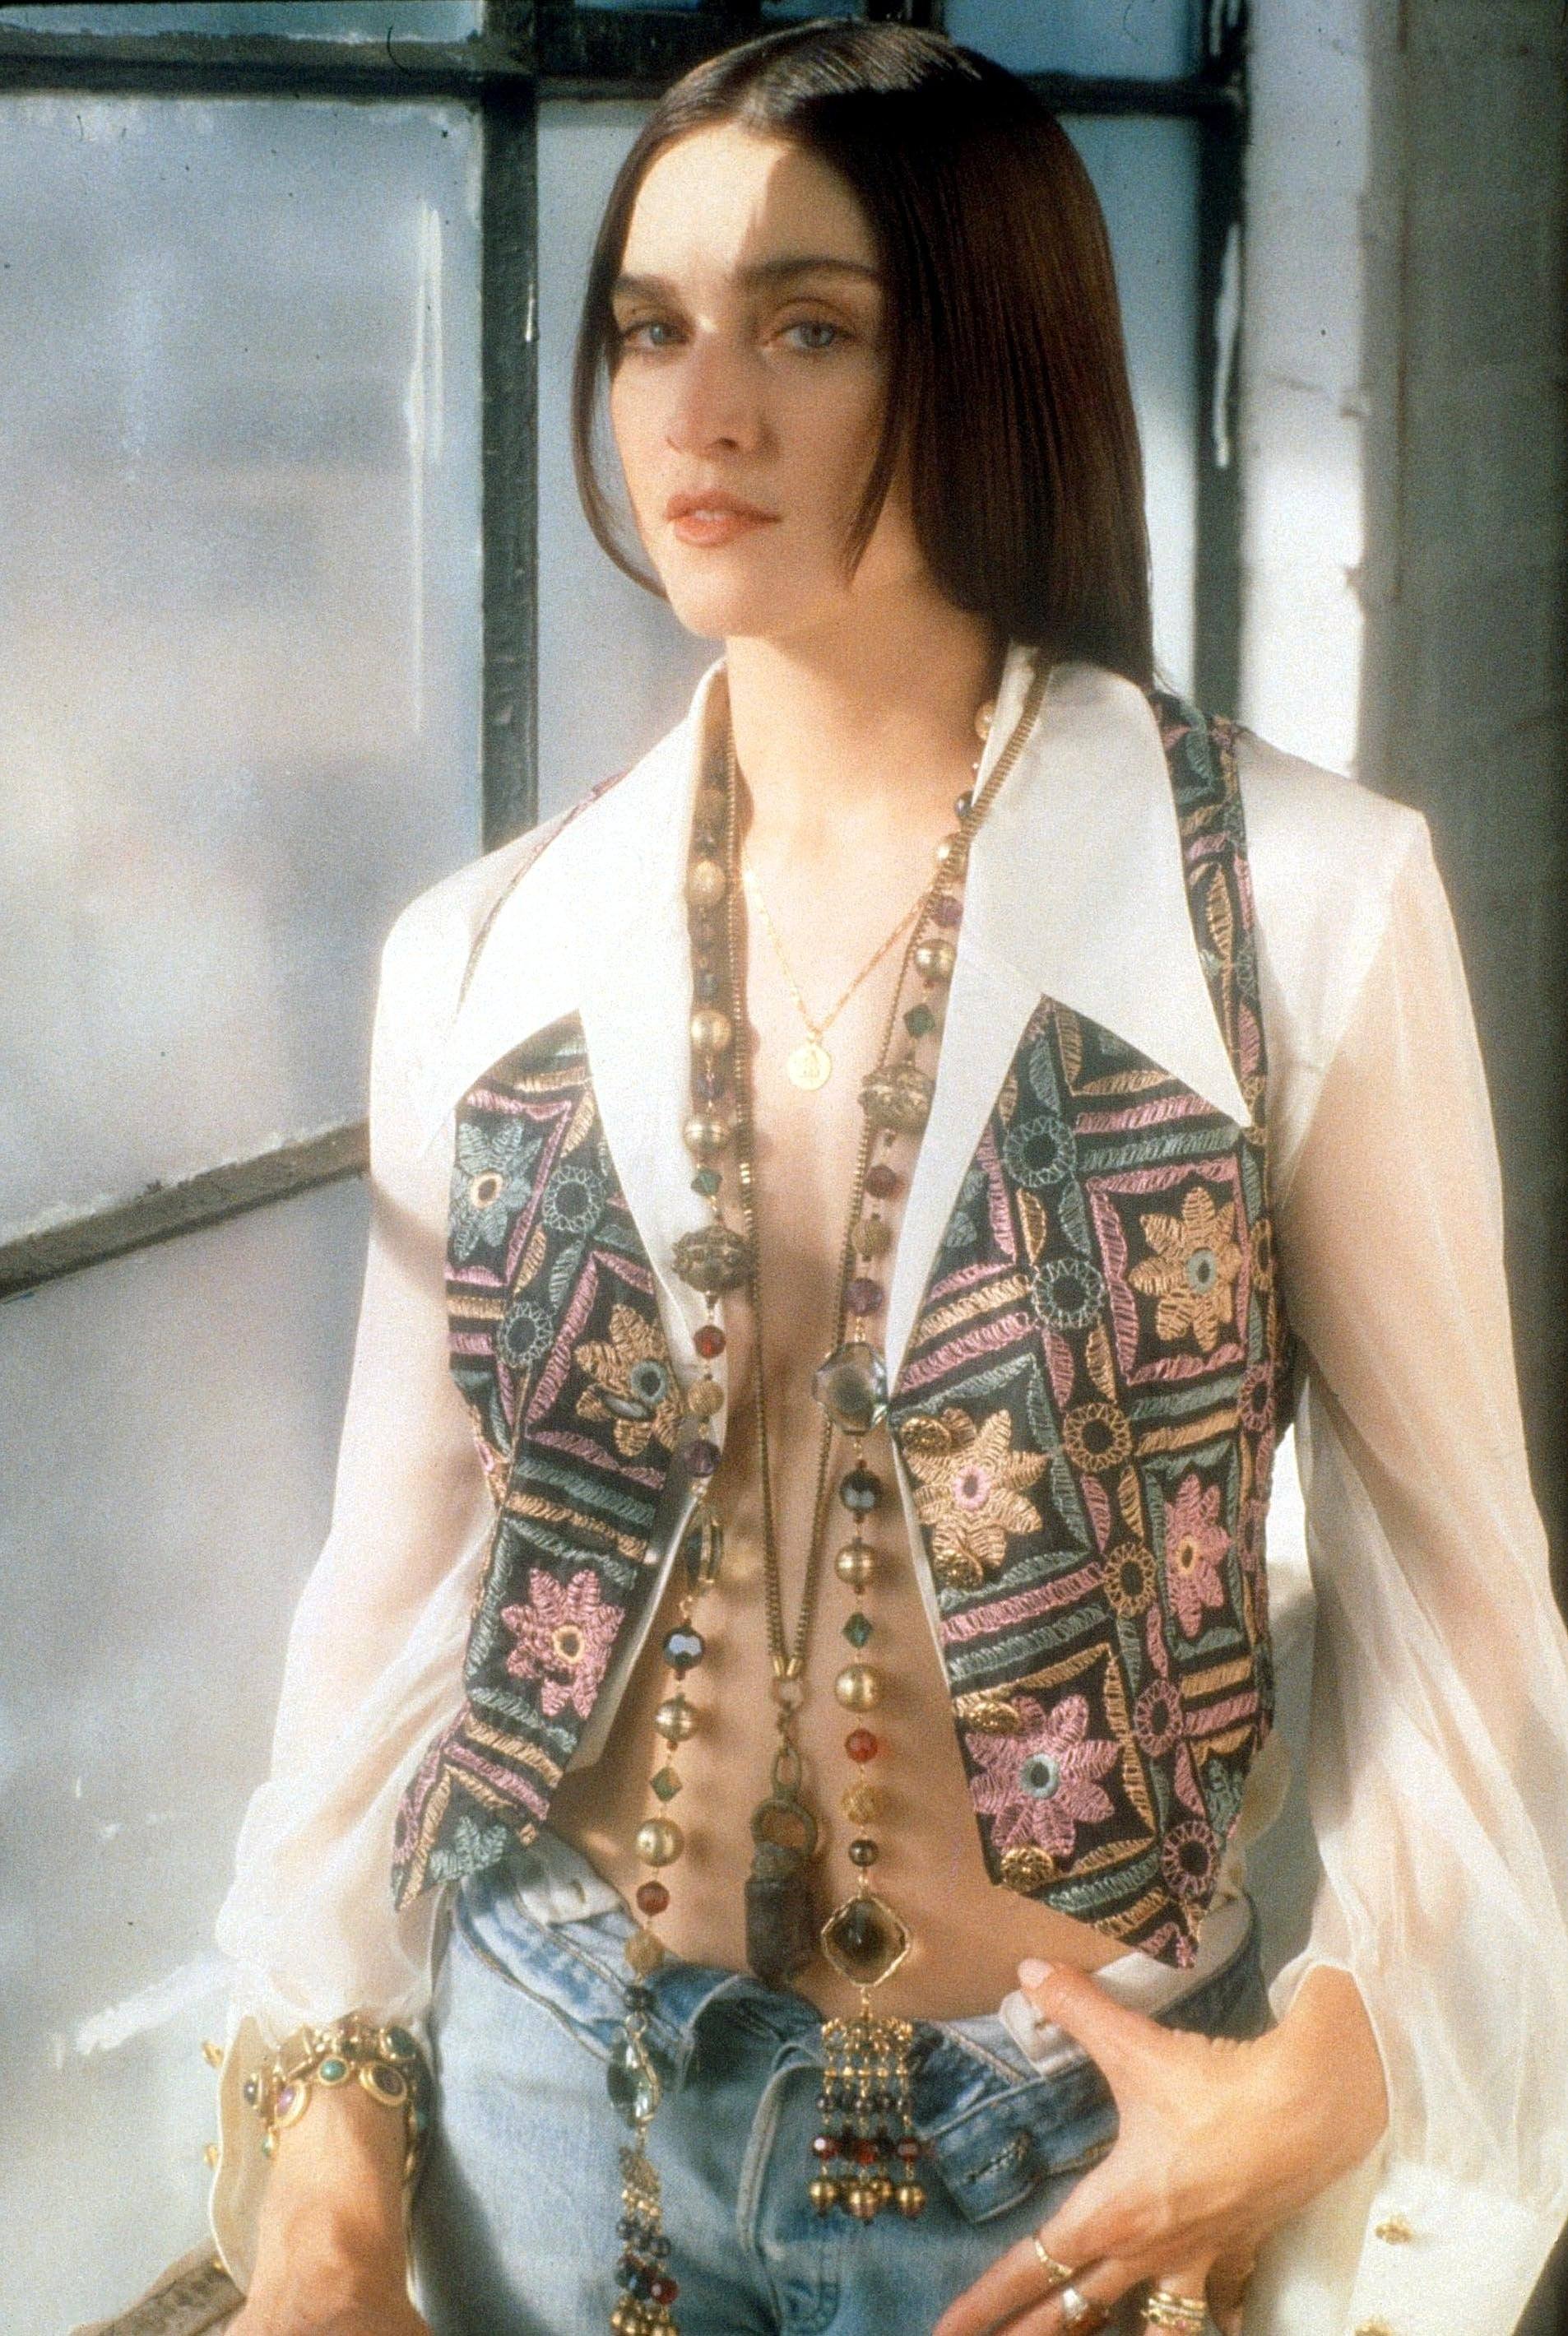 Madonna in 1989 with long brunette hair wearing a white blouse with patterned waistcoat and long beads